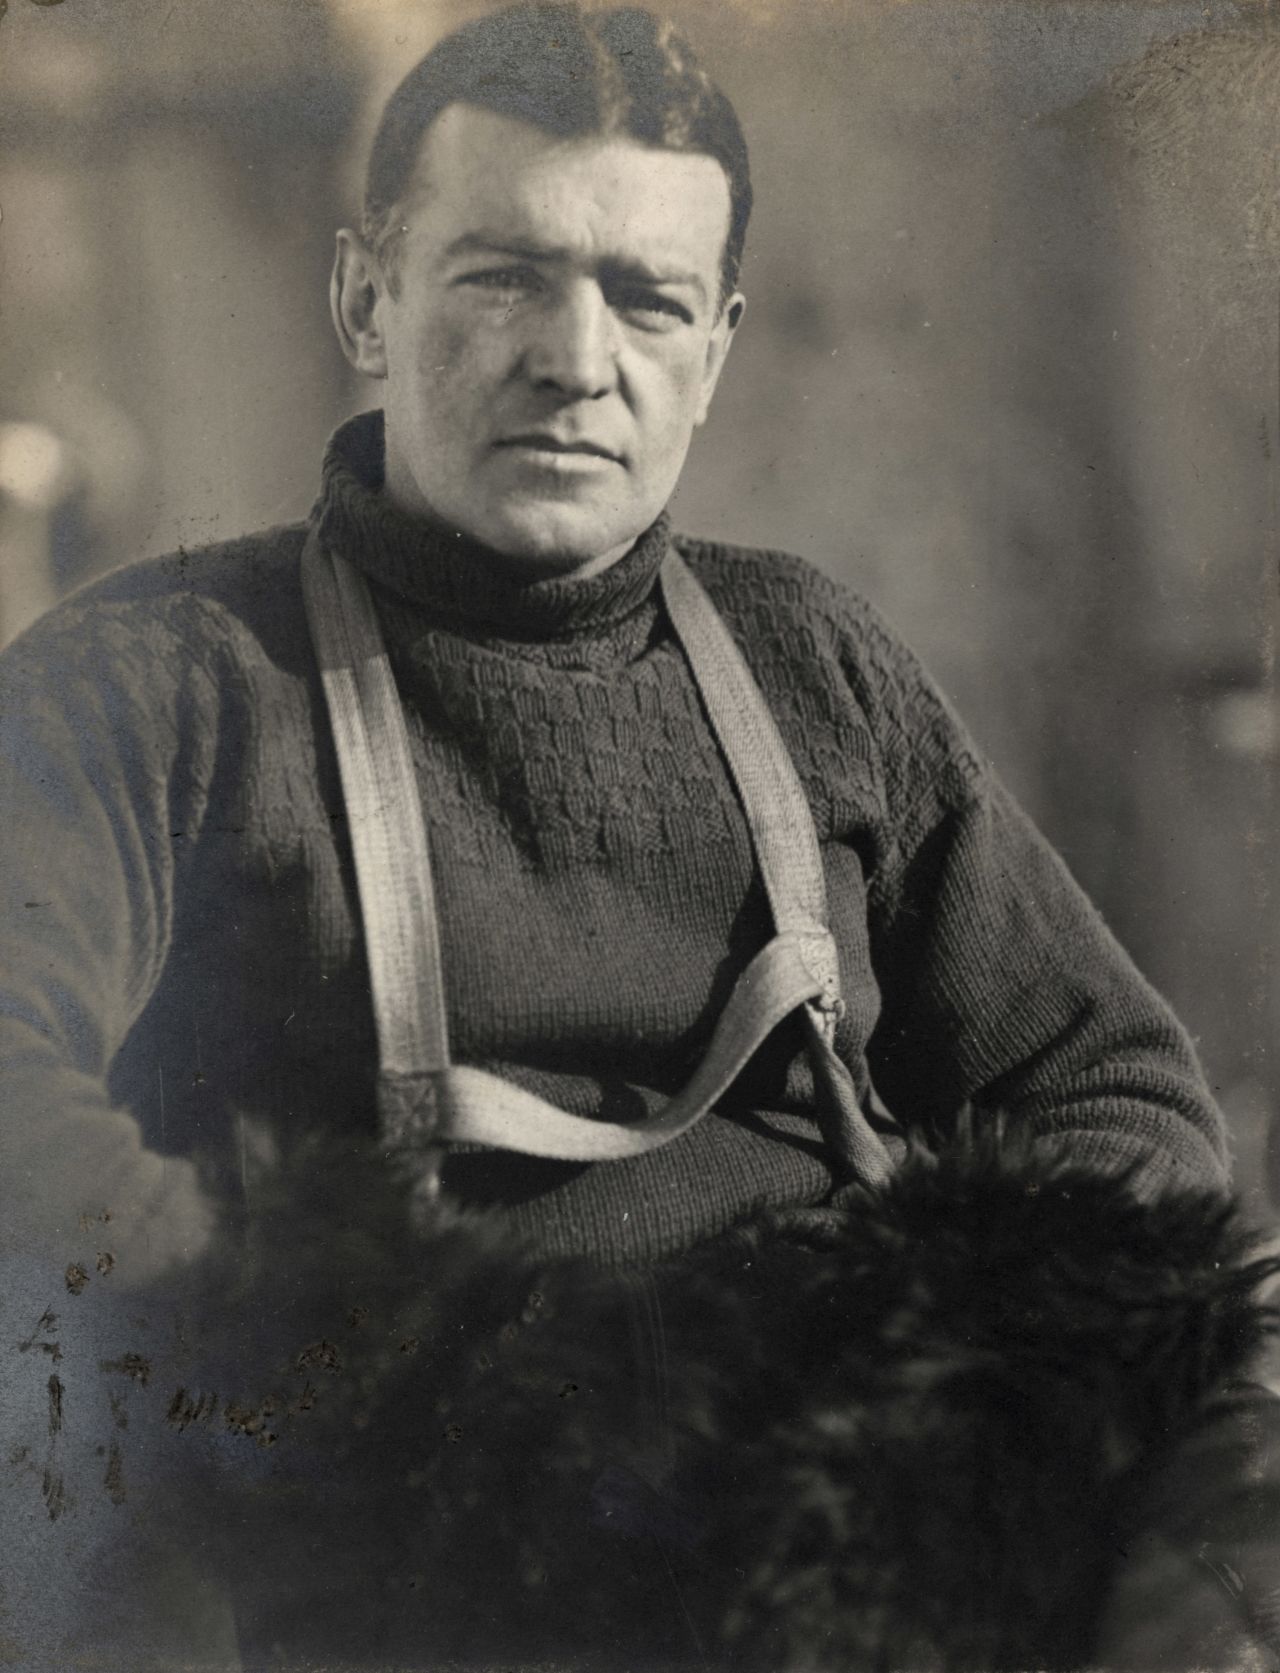 Shackleton's leadership was crucial to getting his men out alive.